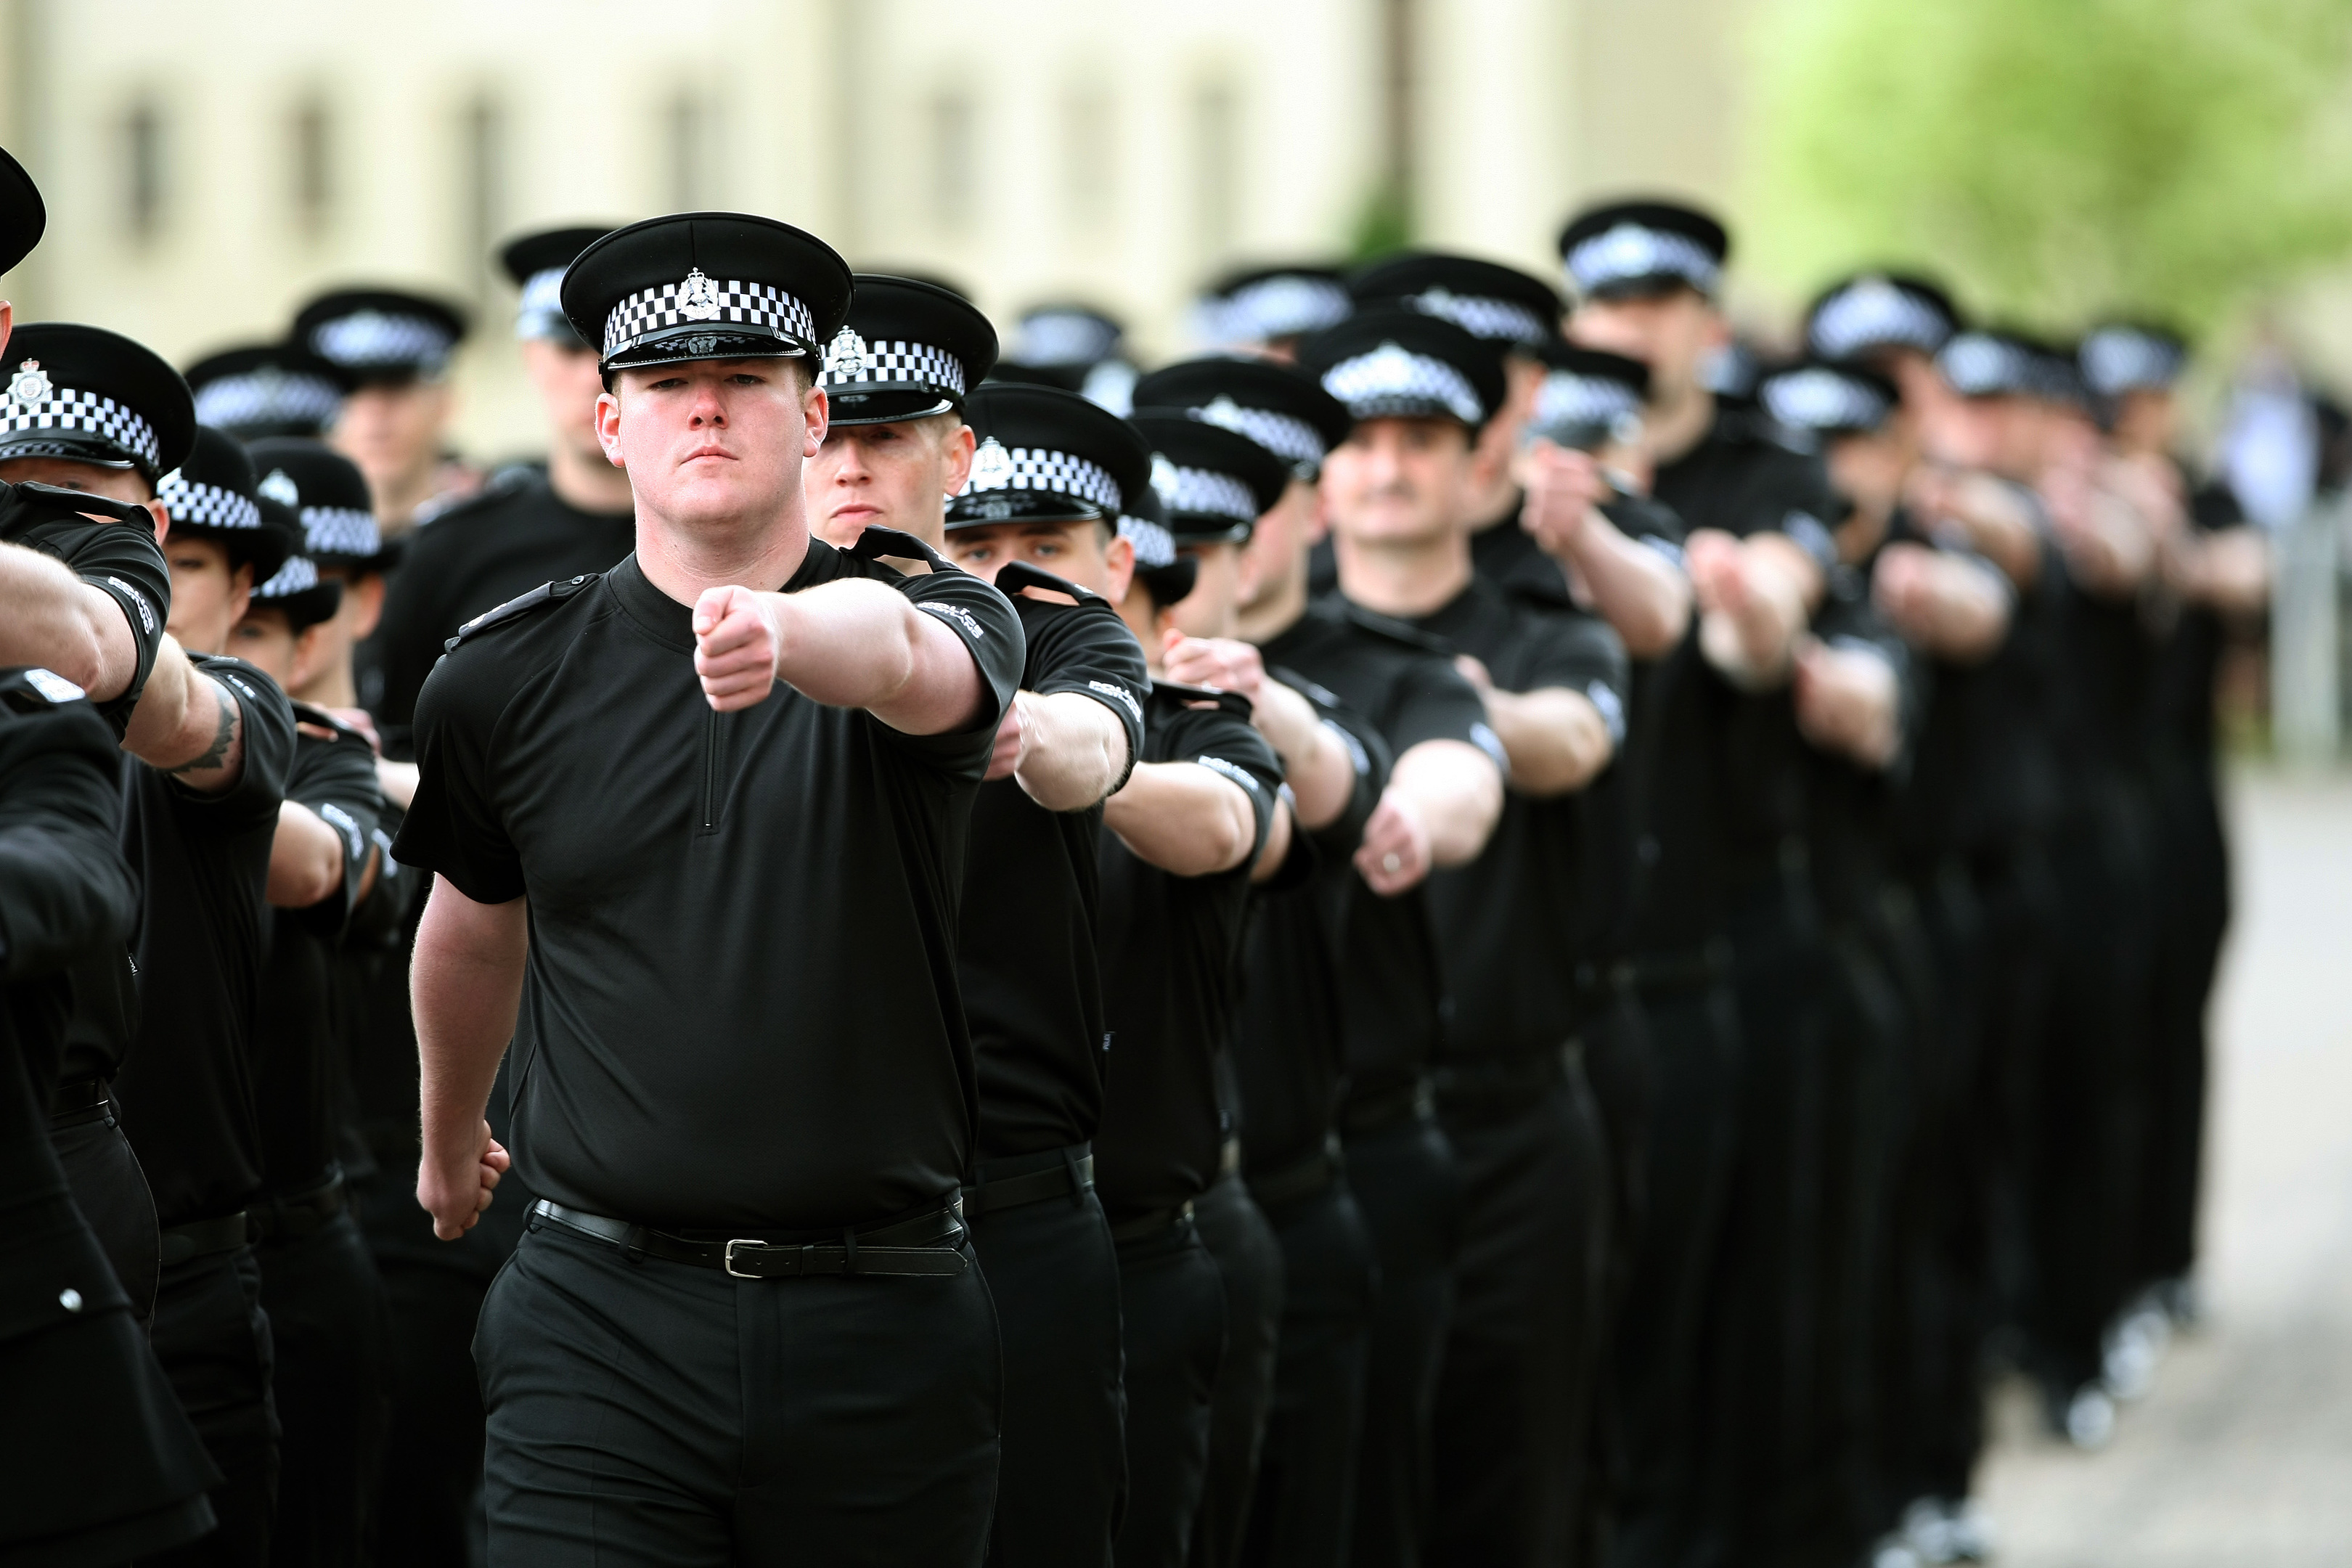 Officers during the passing out parade (Kris Miller/DC Thomson)